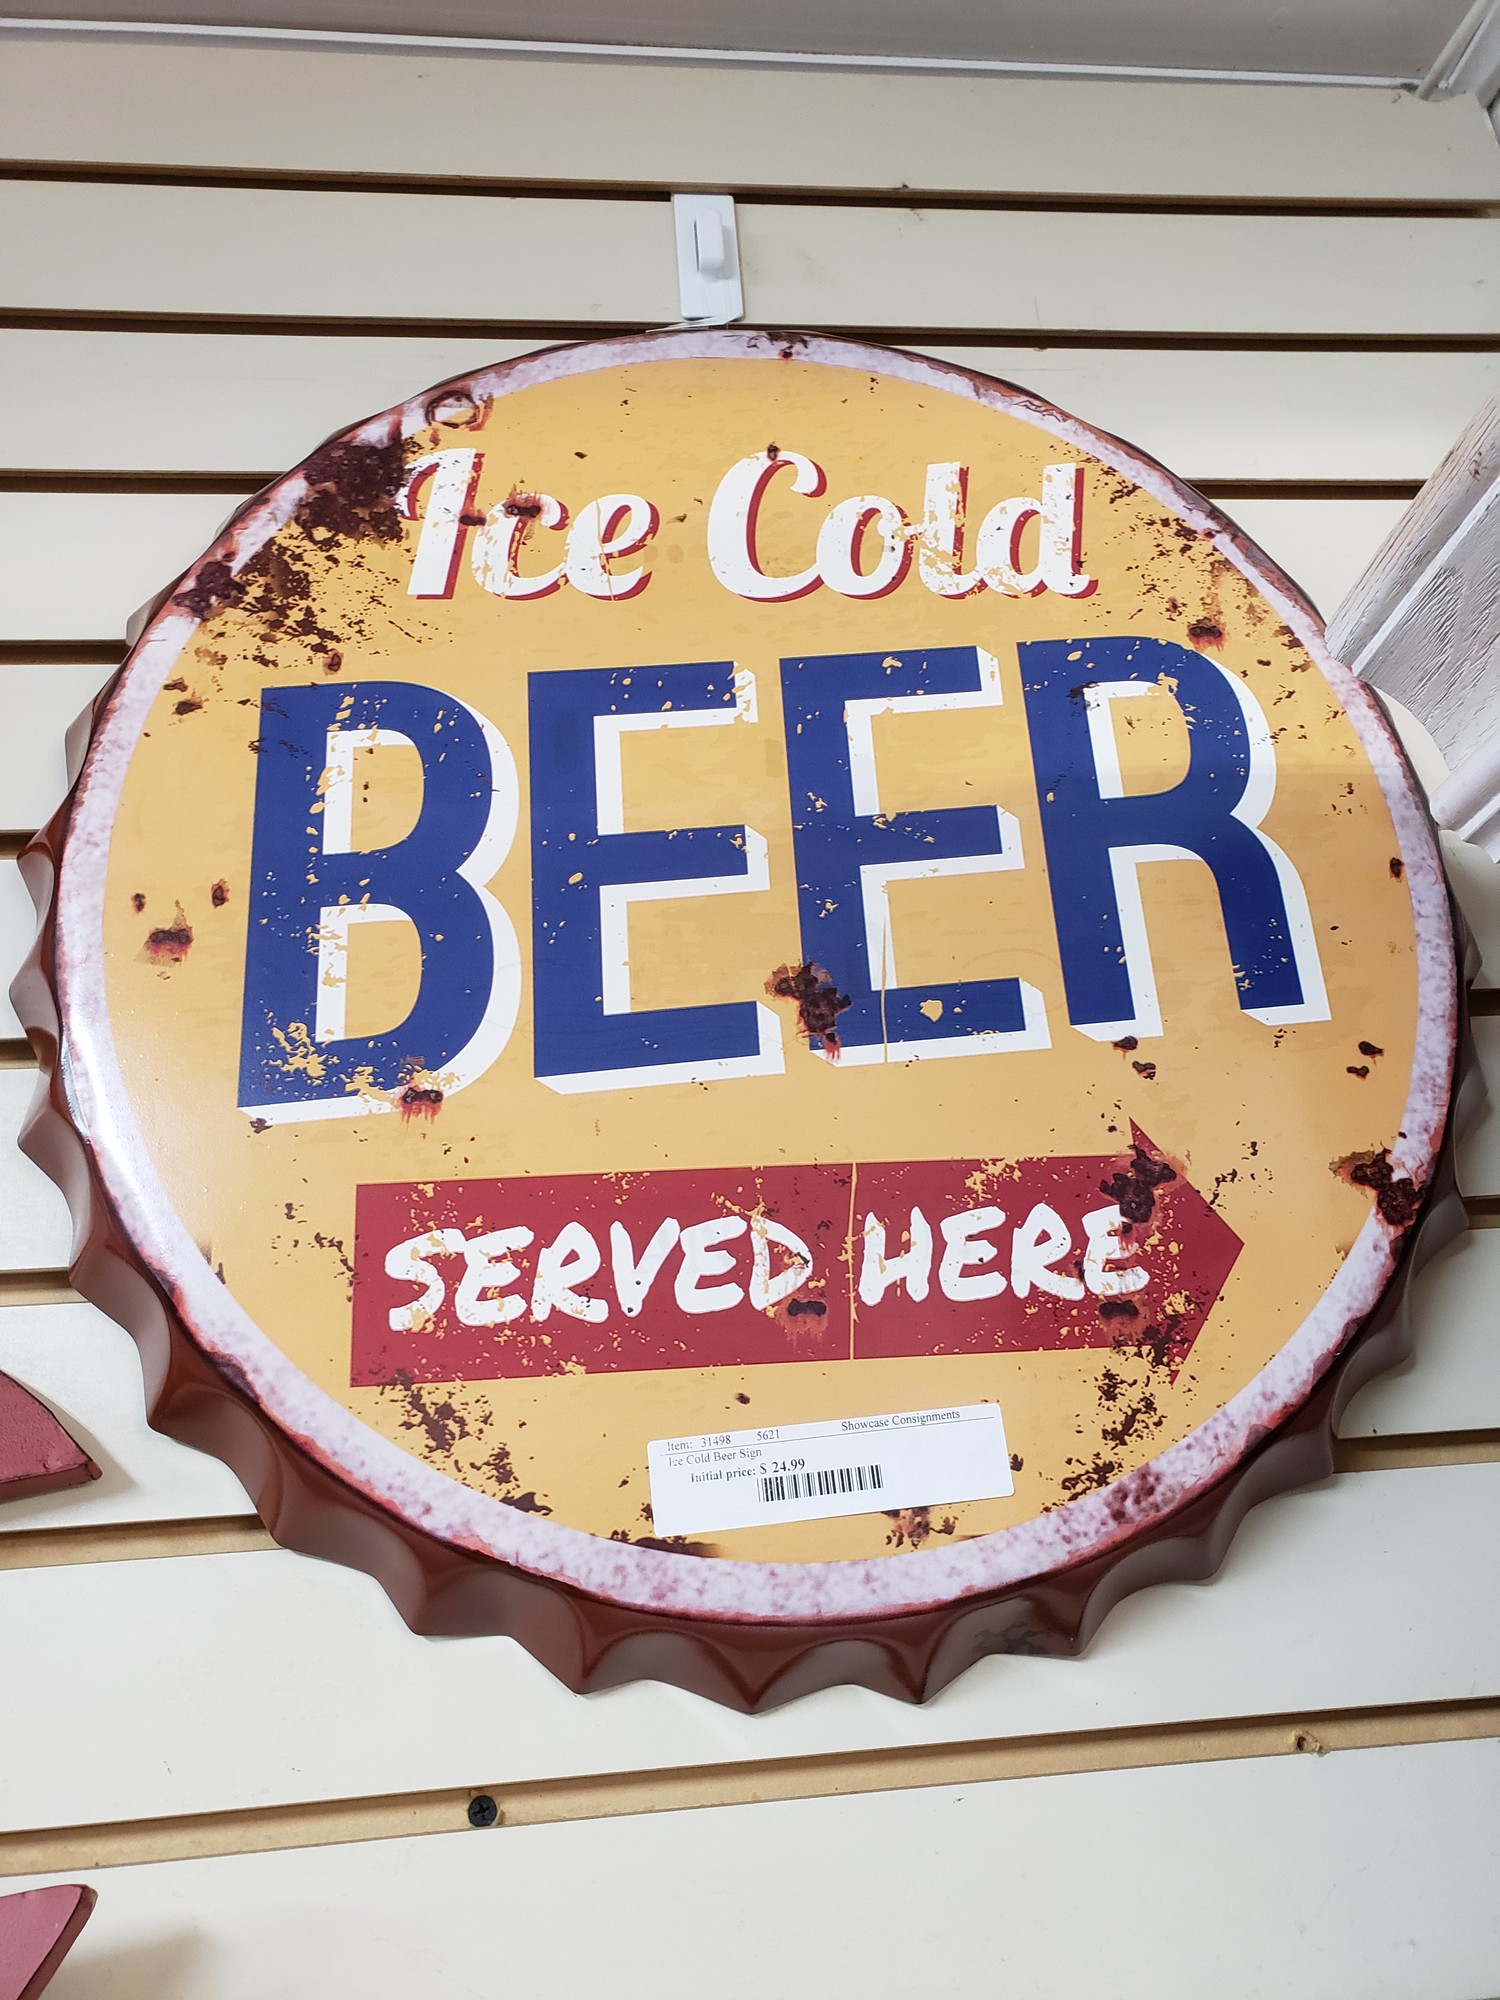 Ice Cold Beer Served Here Sign